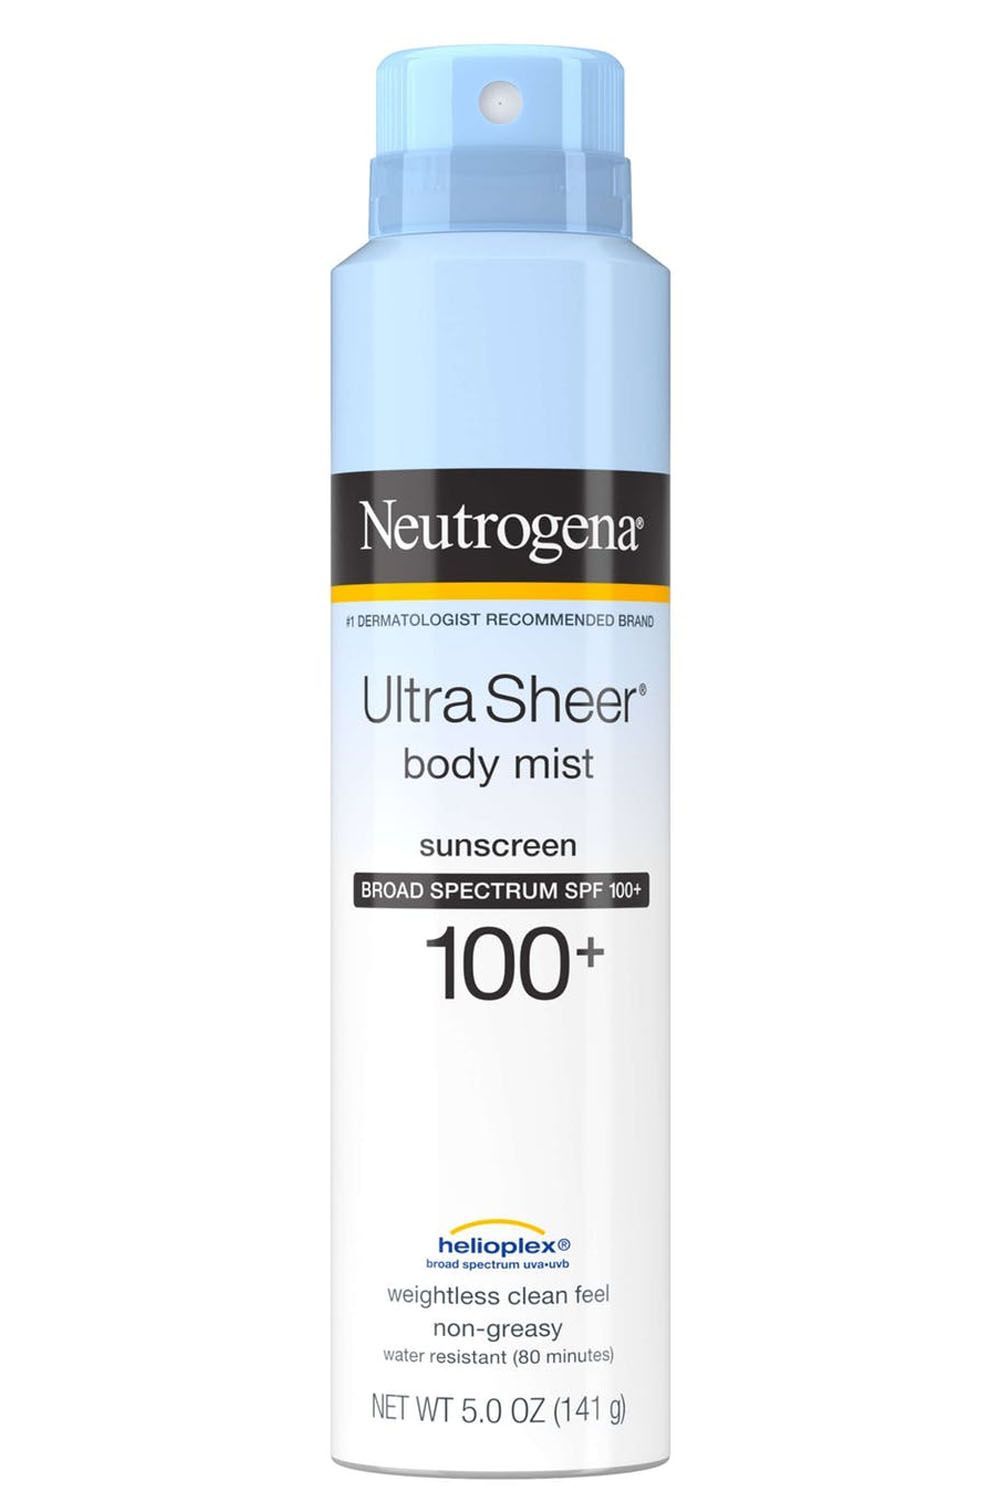 12 Best Spray Sunscreens For Face And Body Of 2021